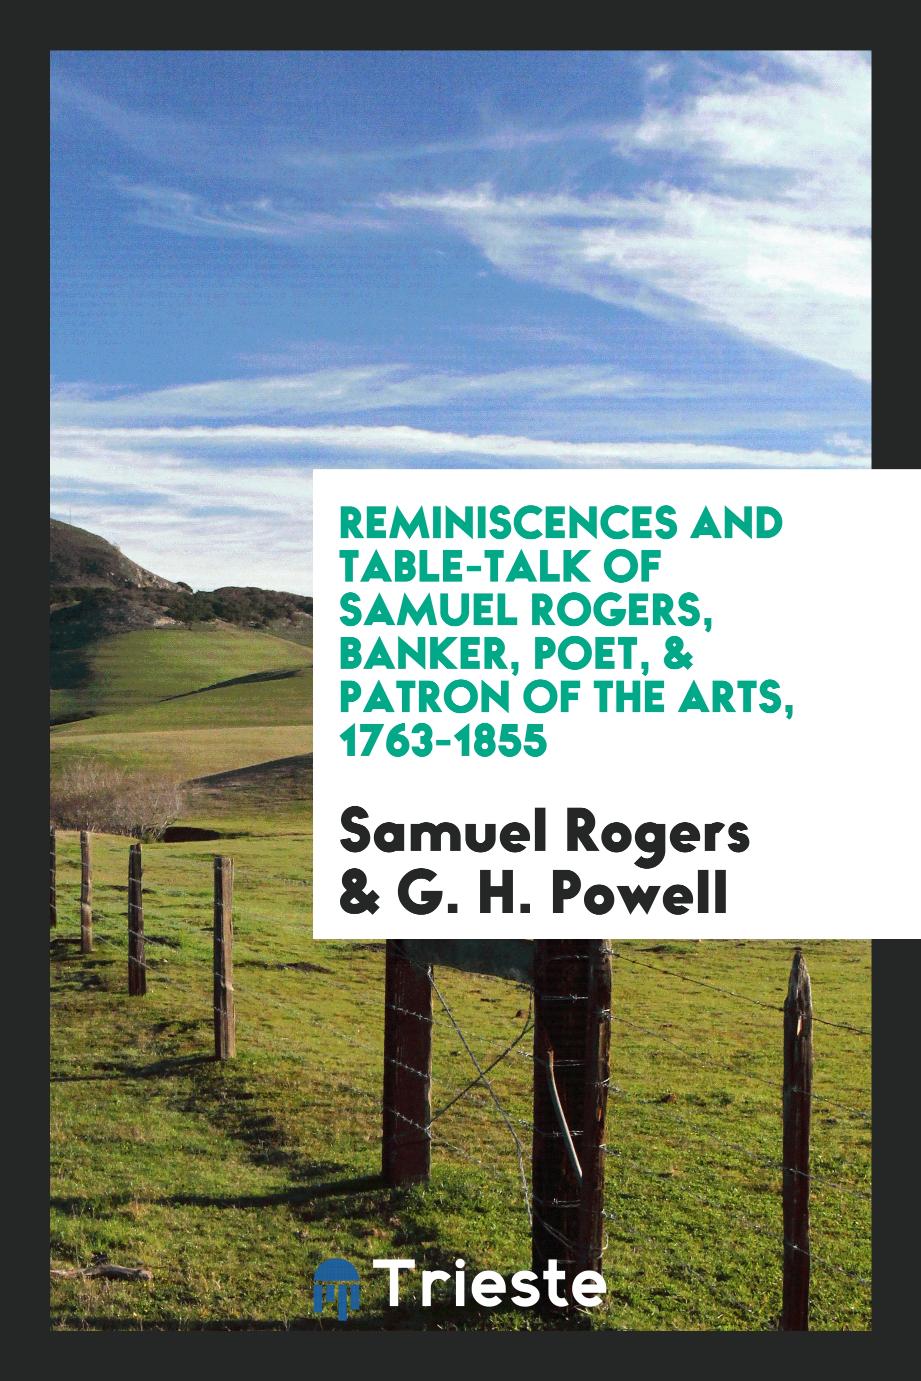 Reminiscences and Table-Talk of Samuel Rogers, Banker, Poet, & Patron of the Arts, 1763-1855